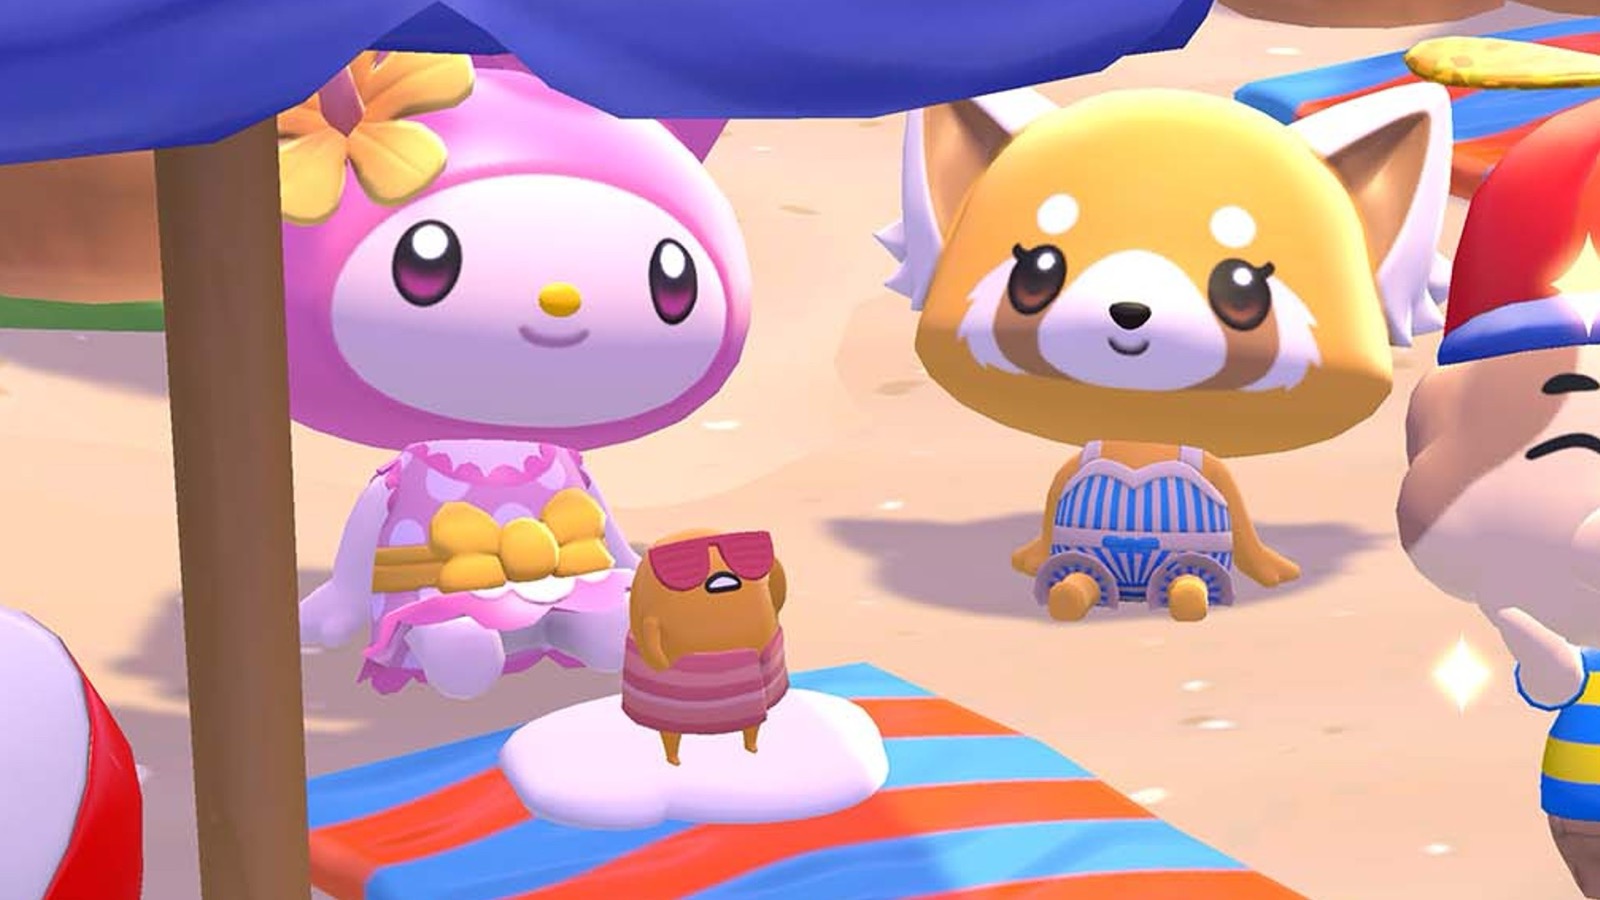 What Sanrio Character Are You? Quiz My Melody at the beach